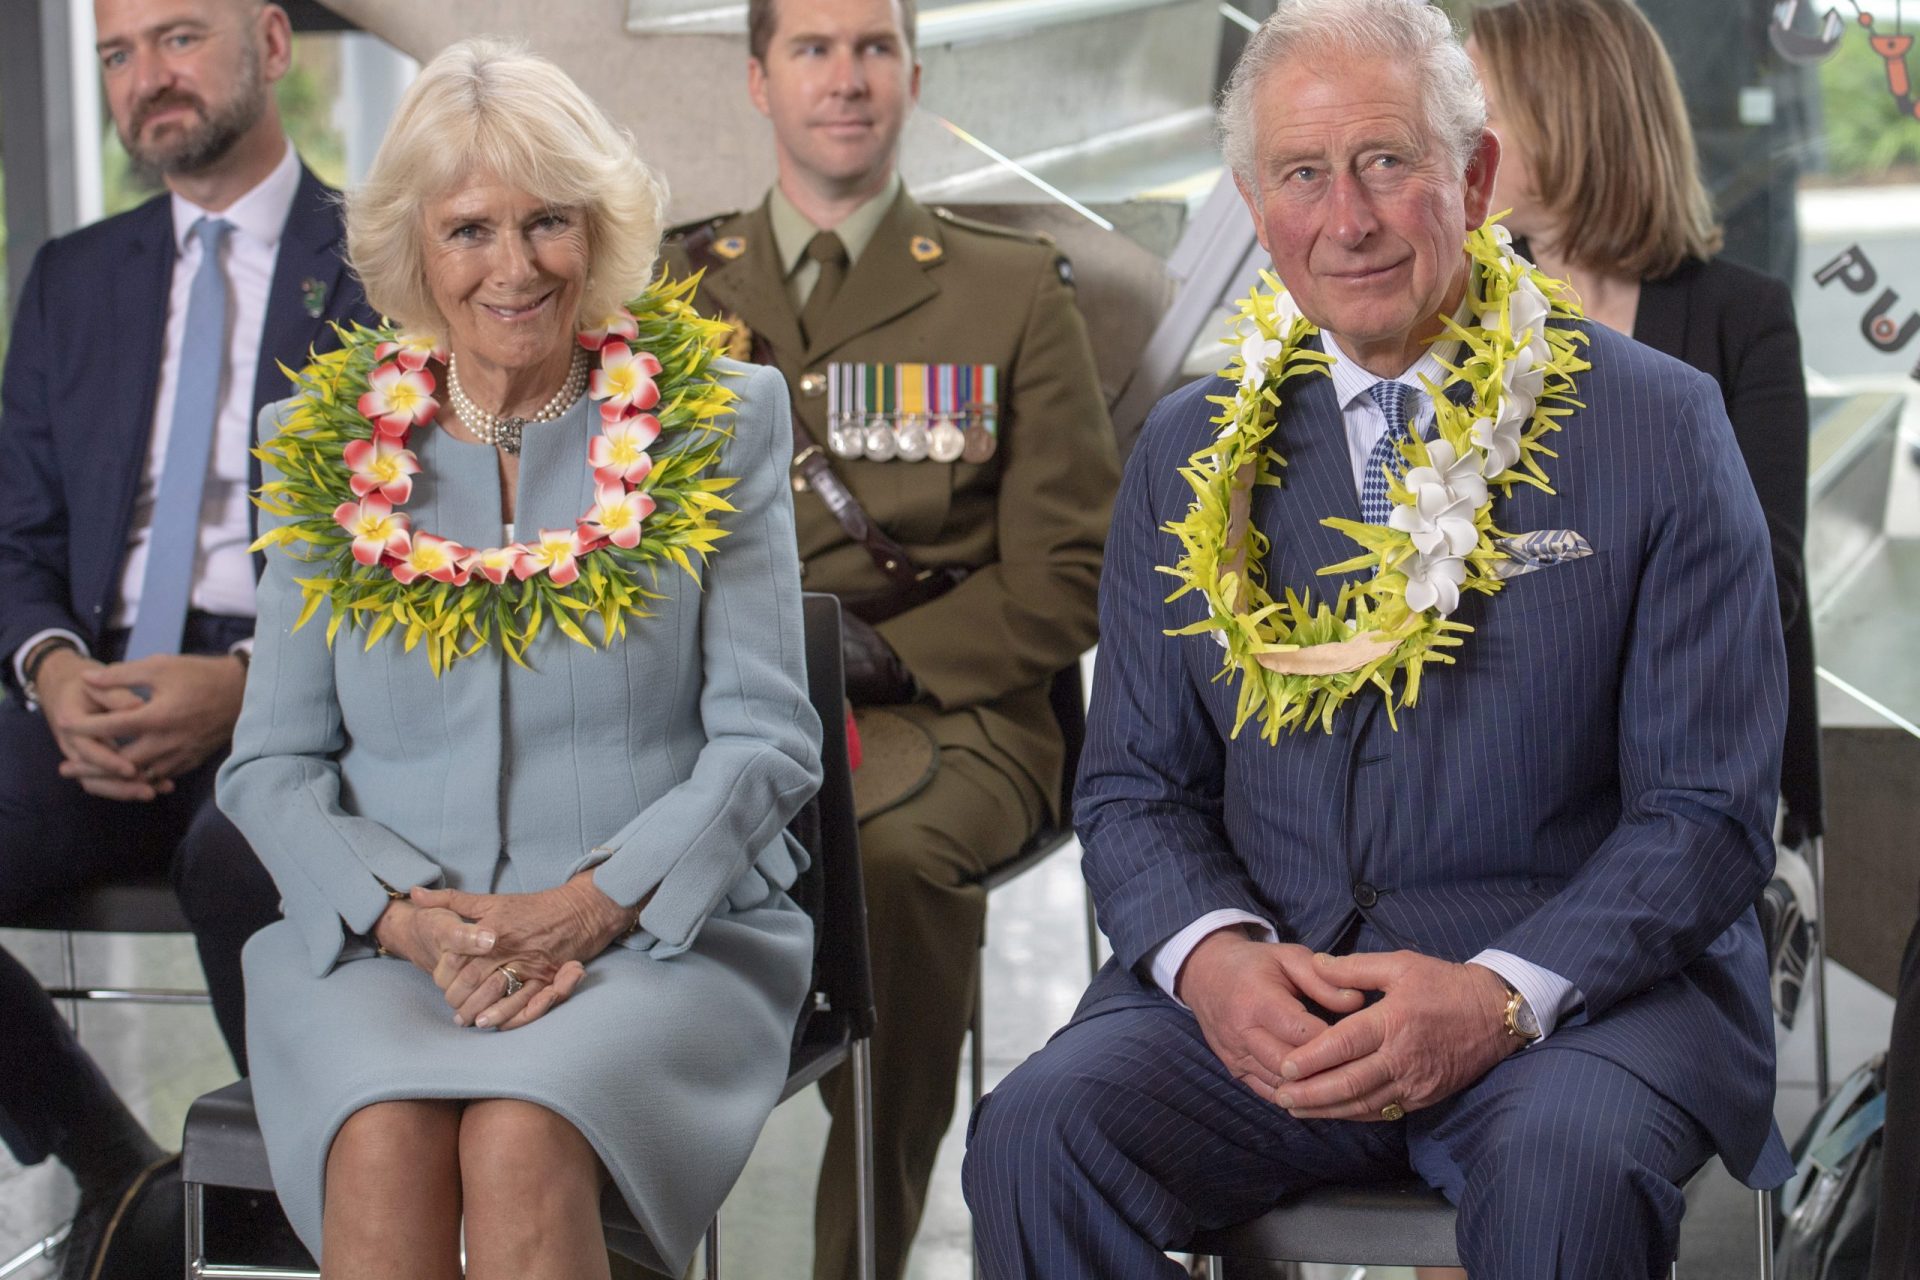 <p>Charles and Camilla were wearing an ’ei, a Maori flower garland, in 2019. Made from natural flowers and leaves, these garlands are used to welcome or honor special visitors.</p>